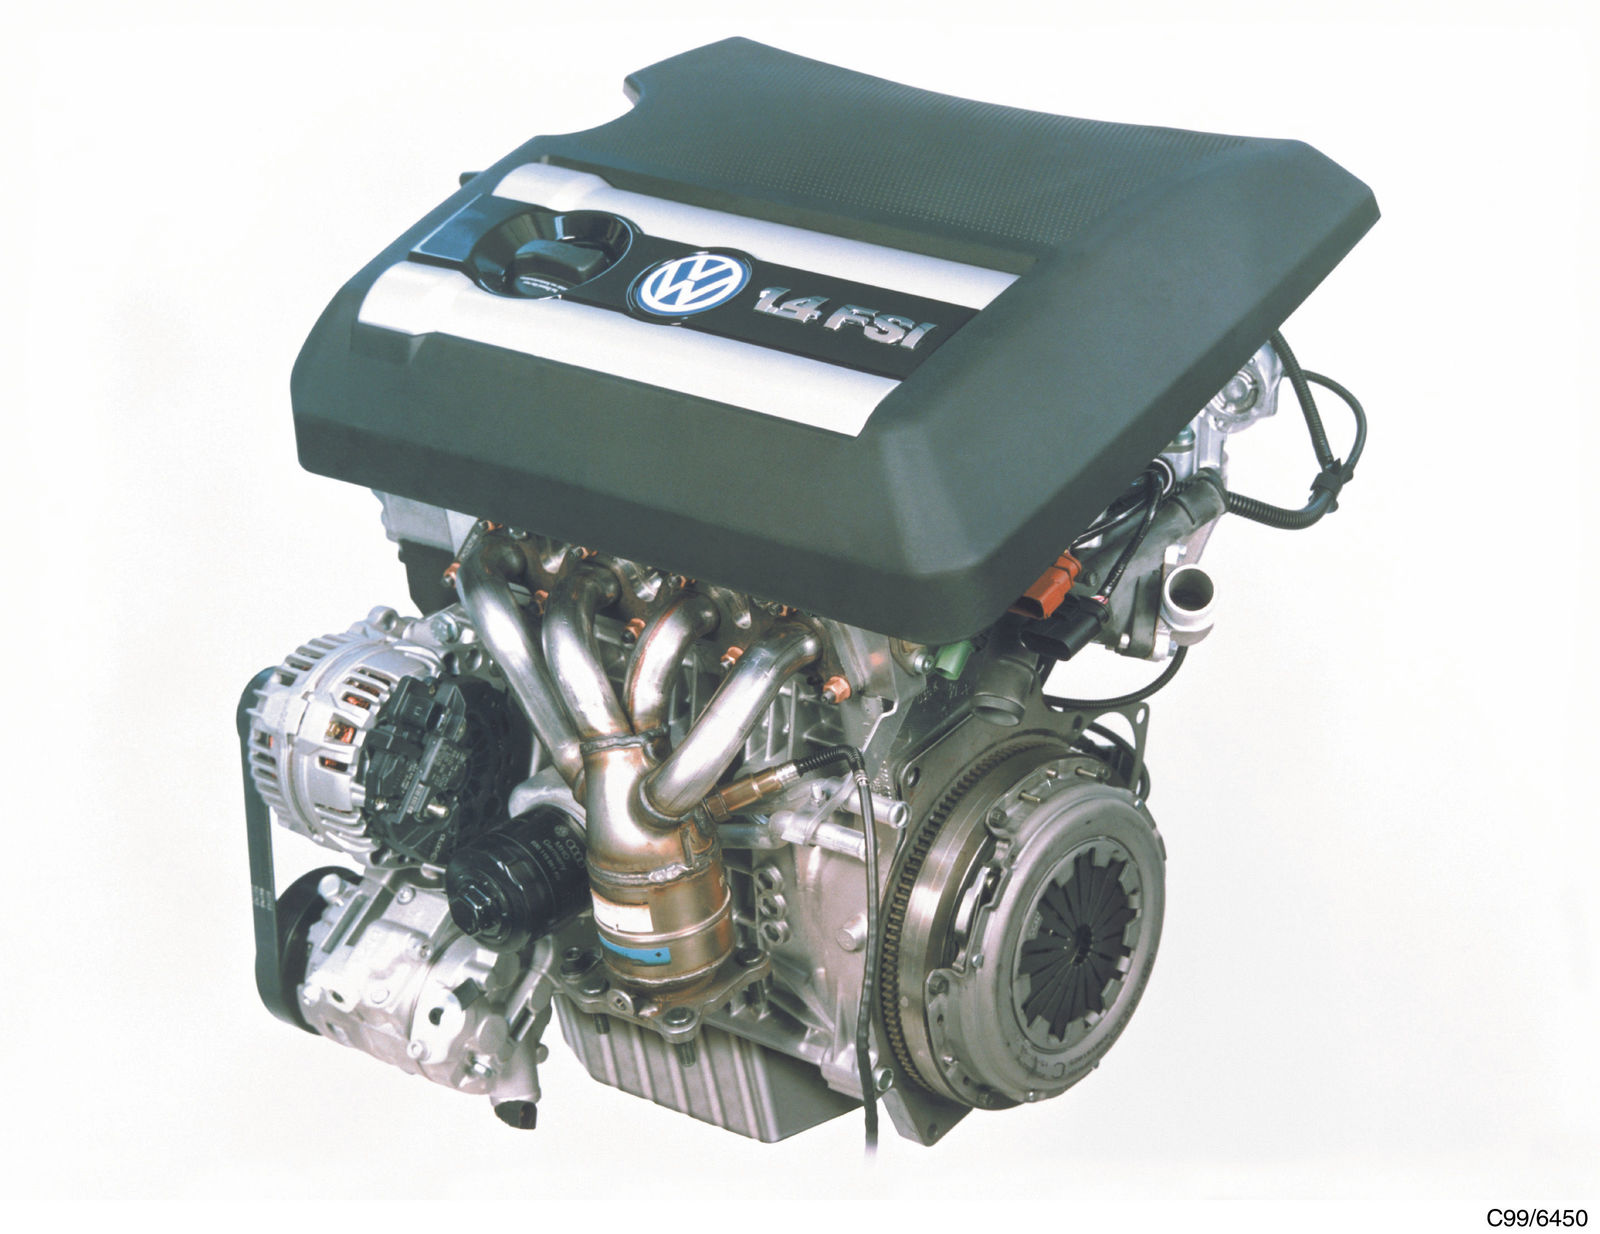 Product, Technology: Lupo 1.4l (1999)